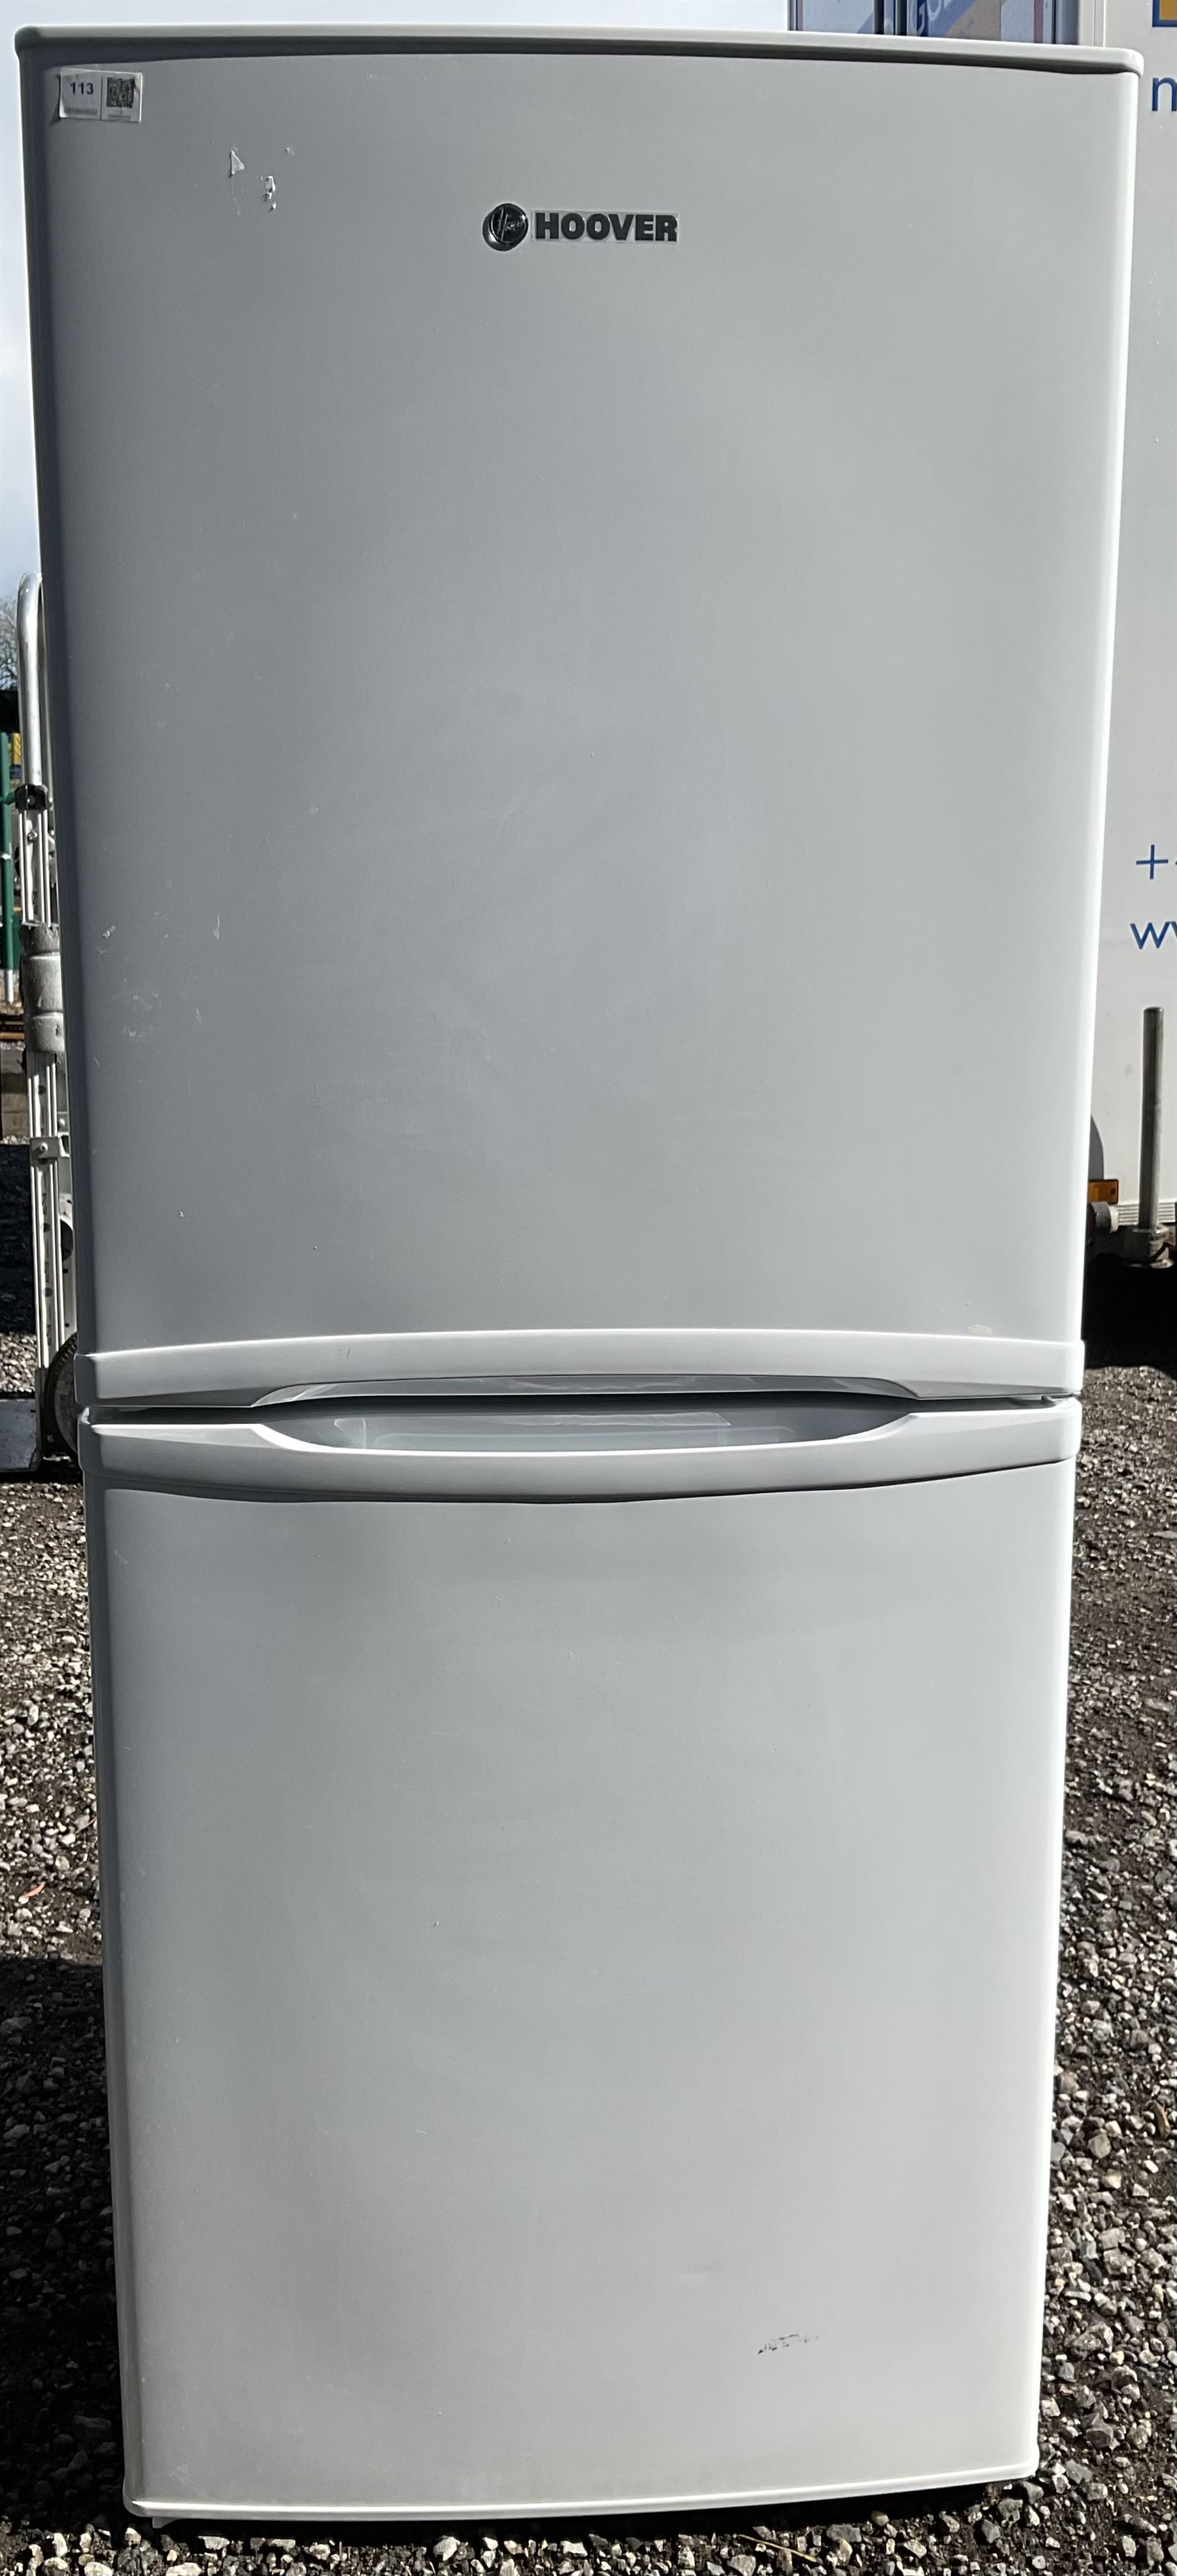 Hoover fridge freezer - THIS LOT IS TO BE COLLECTED BY APPOINTMENT FROM DUGGLEBY STORAGE